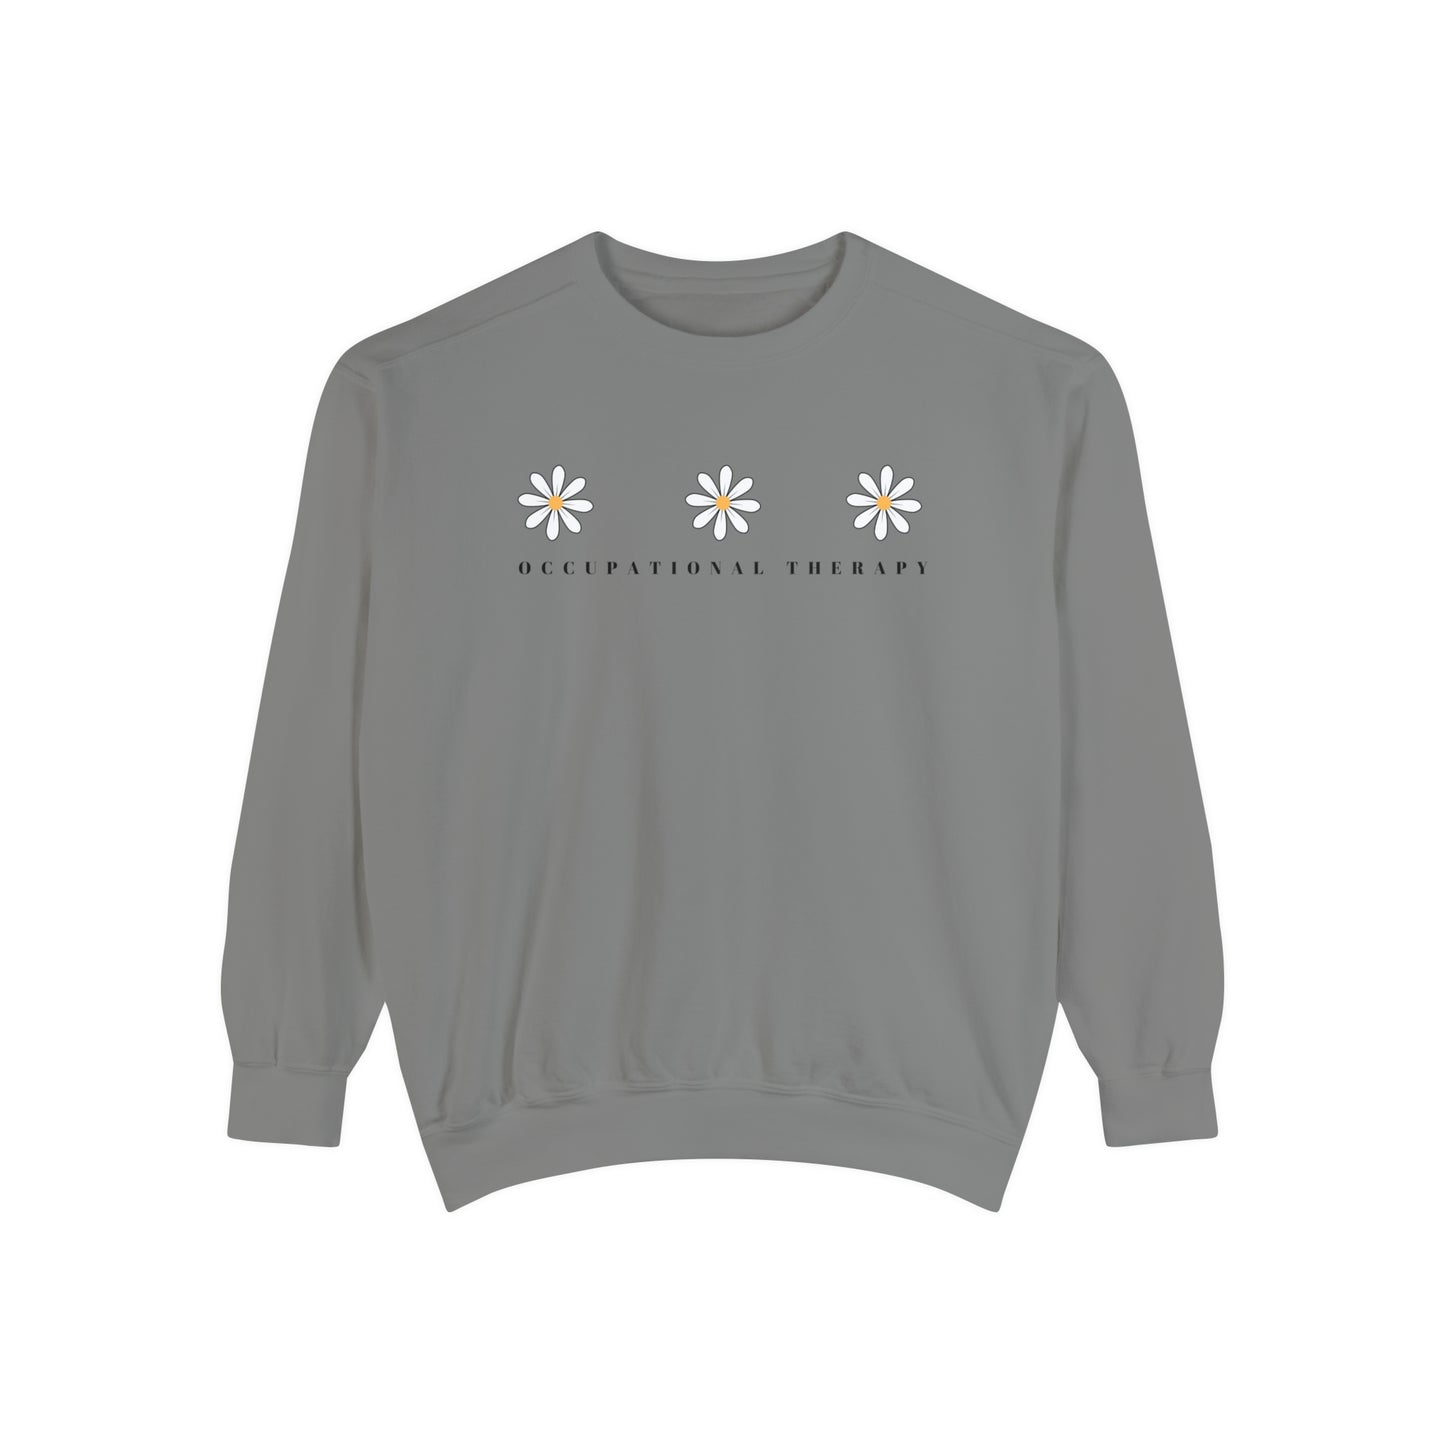 Daisy Occupational Therapy Comfort Colors Sweatshirt